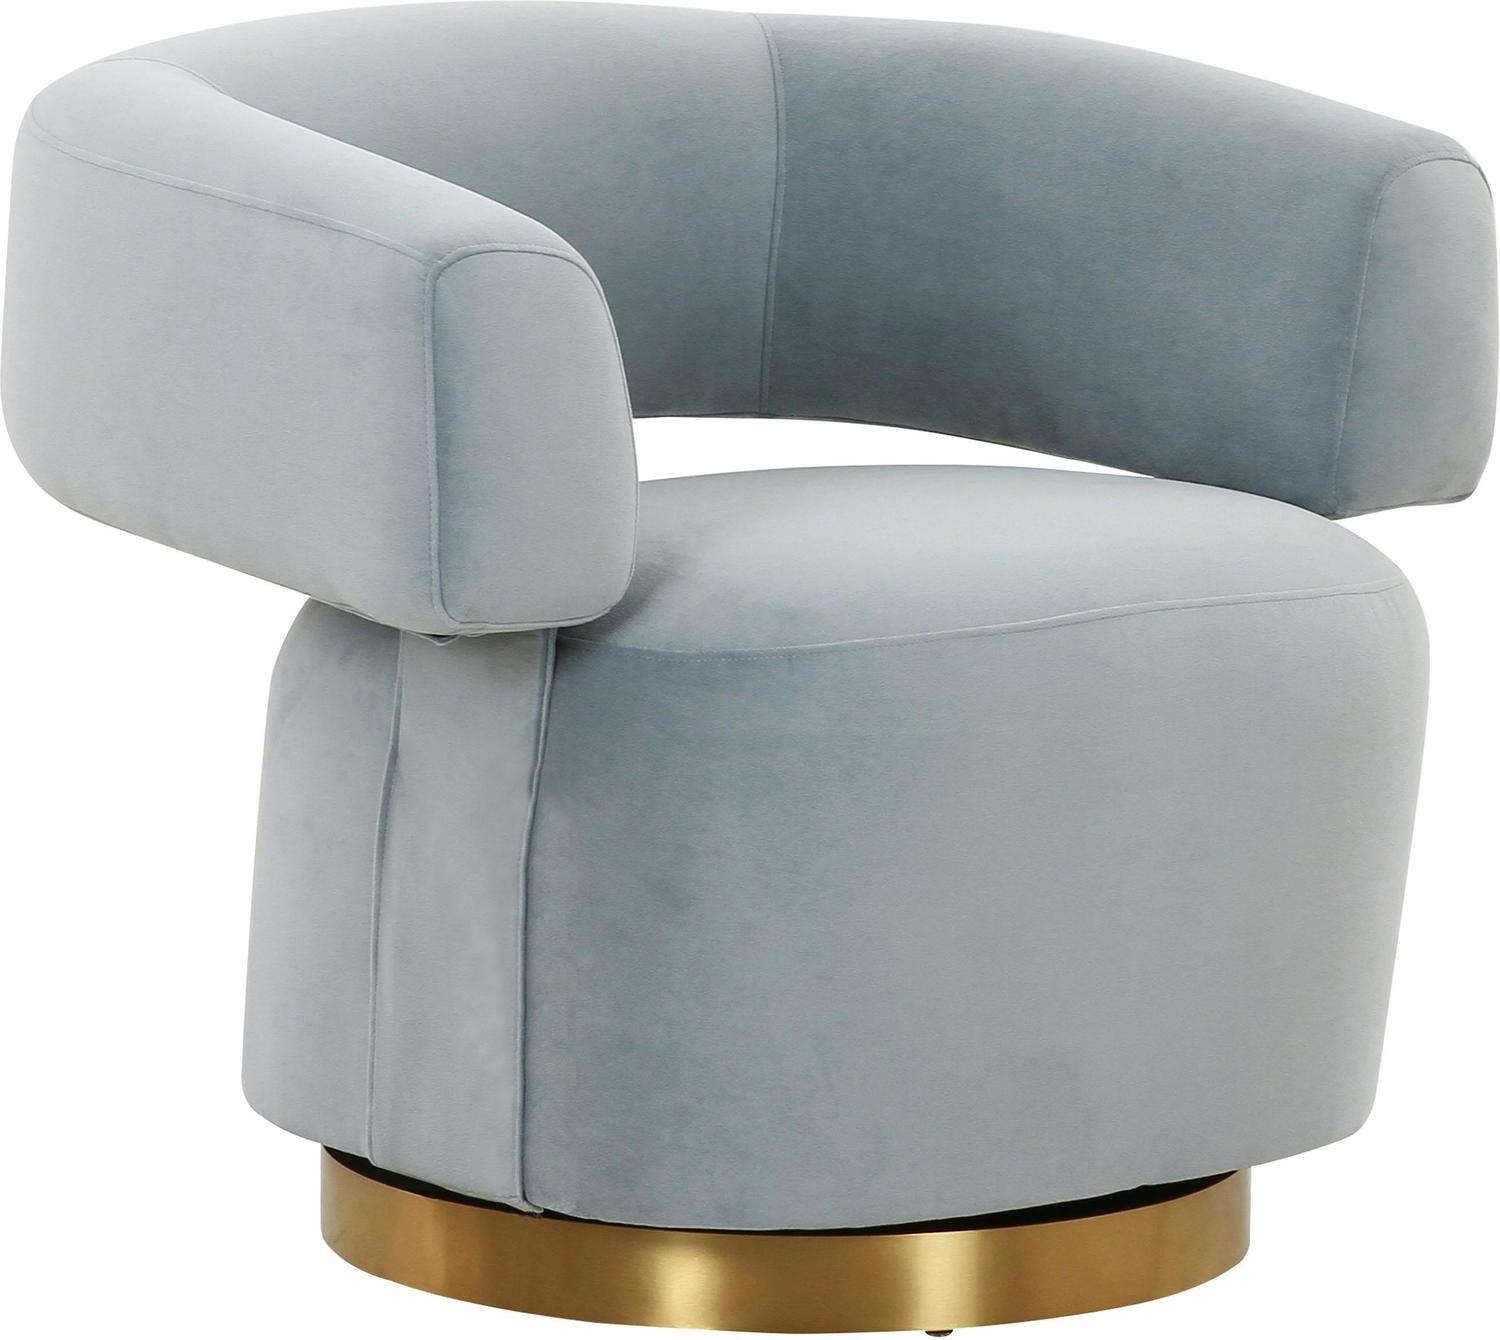  Tov Furniture Accent Chairs Chairs Grey